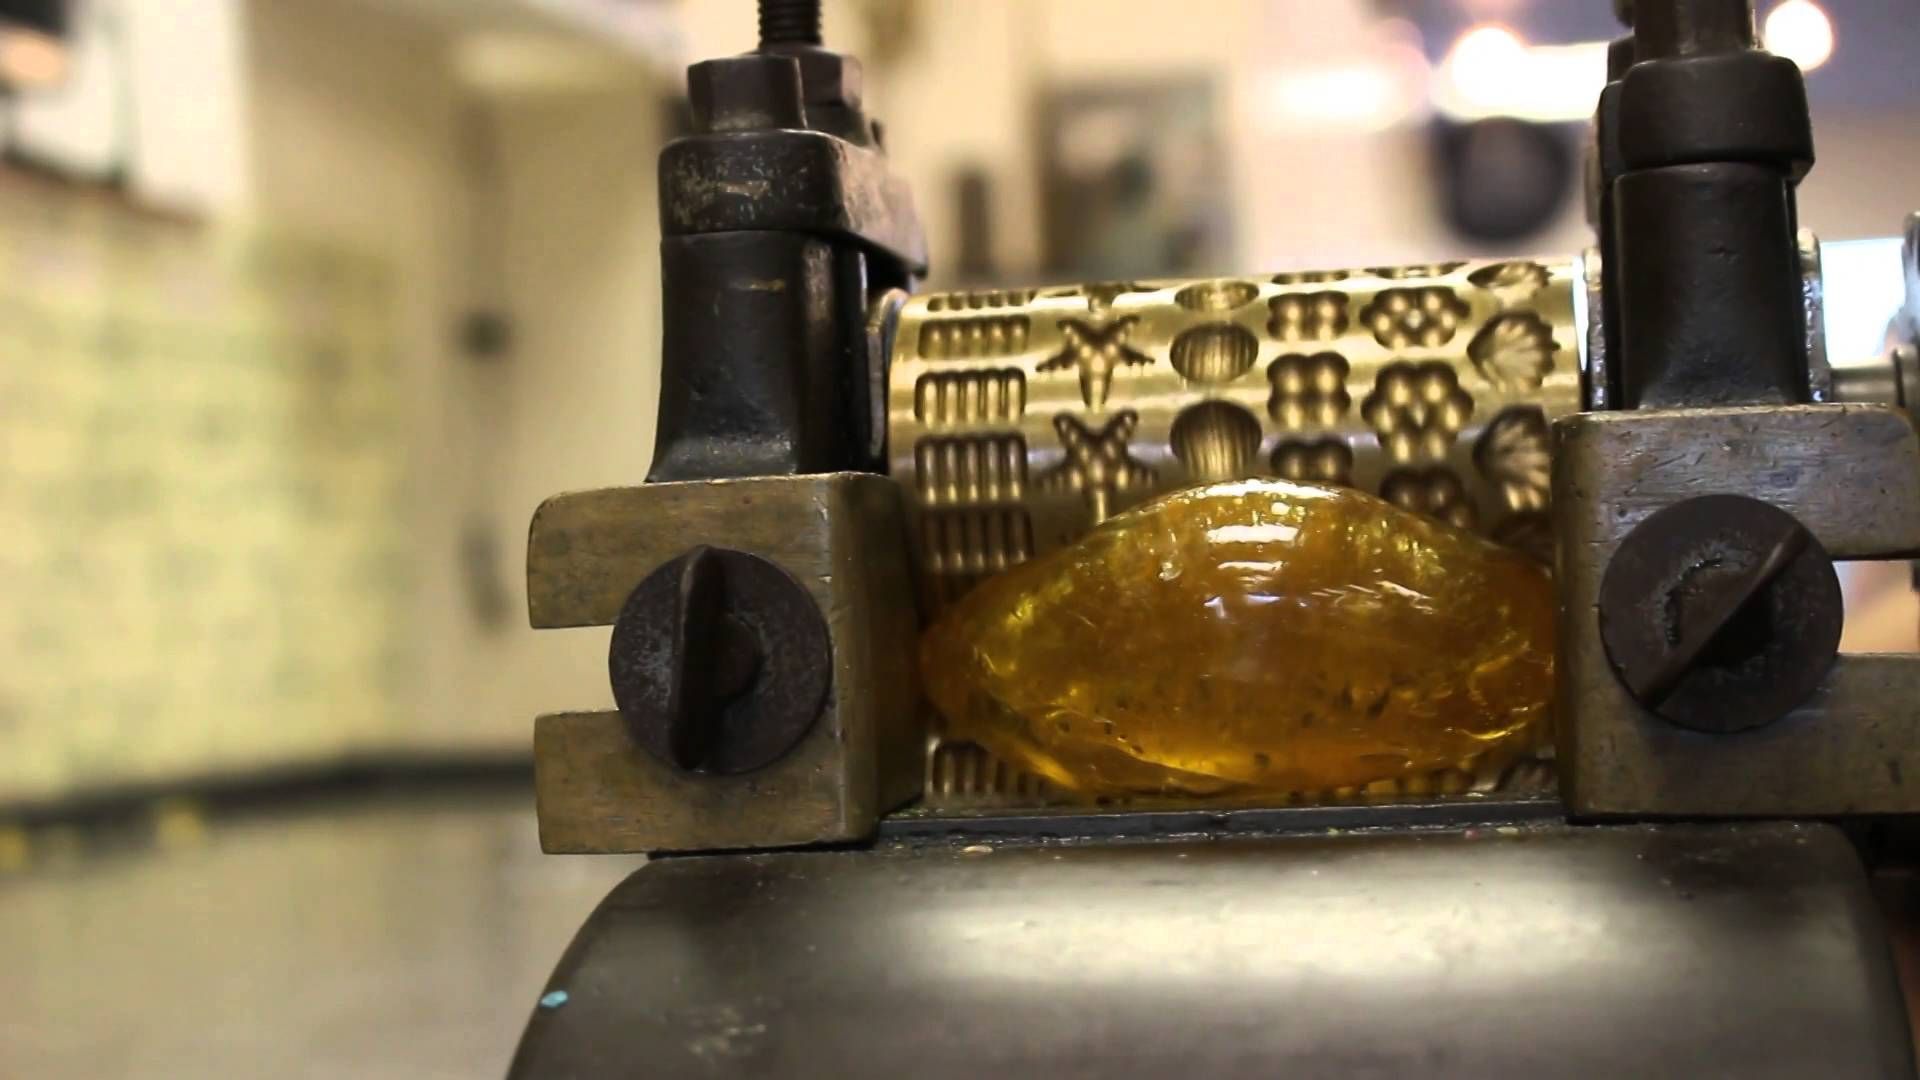 Watching a Machine From the 1800s Make Candy Is a Surprisingly